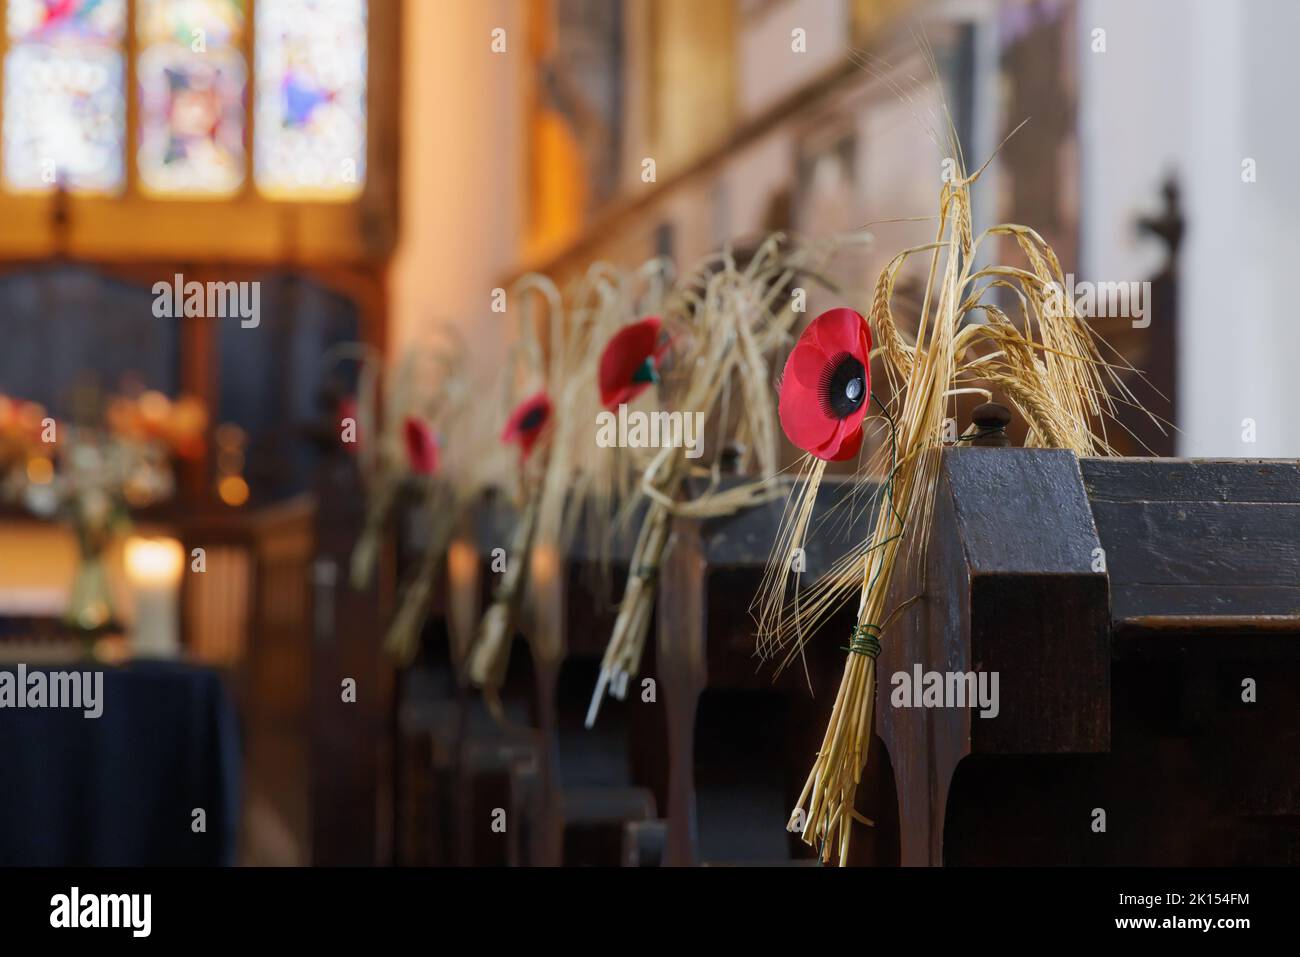 Traditional corn dollies decorated with poppies are affixed to the ends of pews in a Northamptonshire village church for the Harvest Festival. Stock Photo